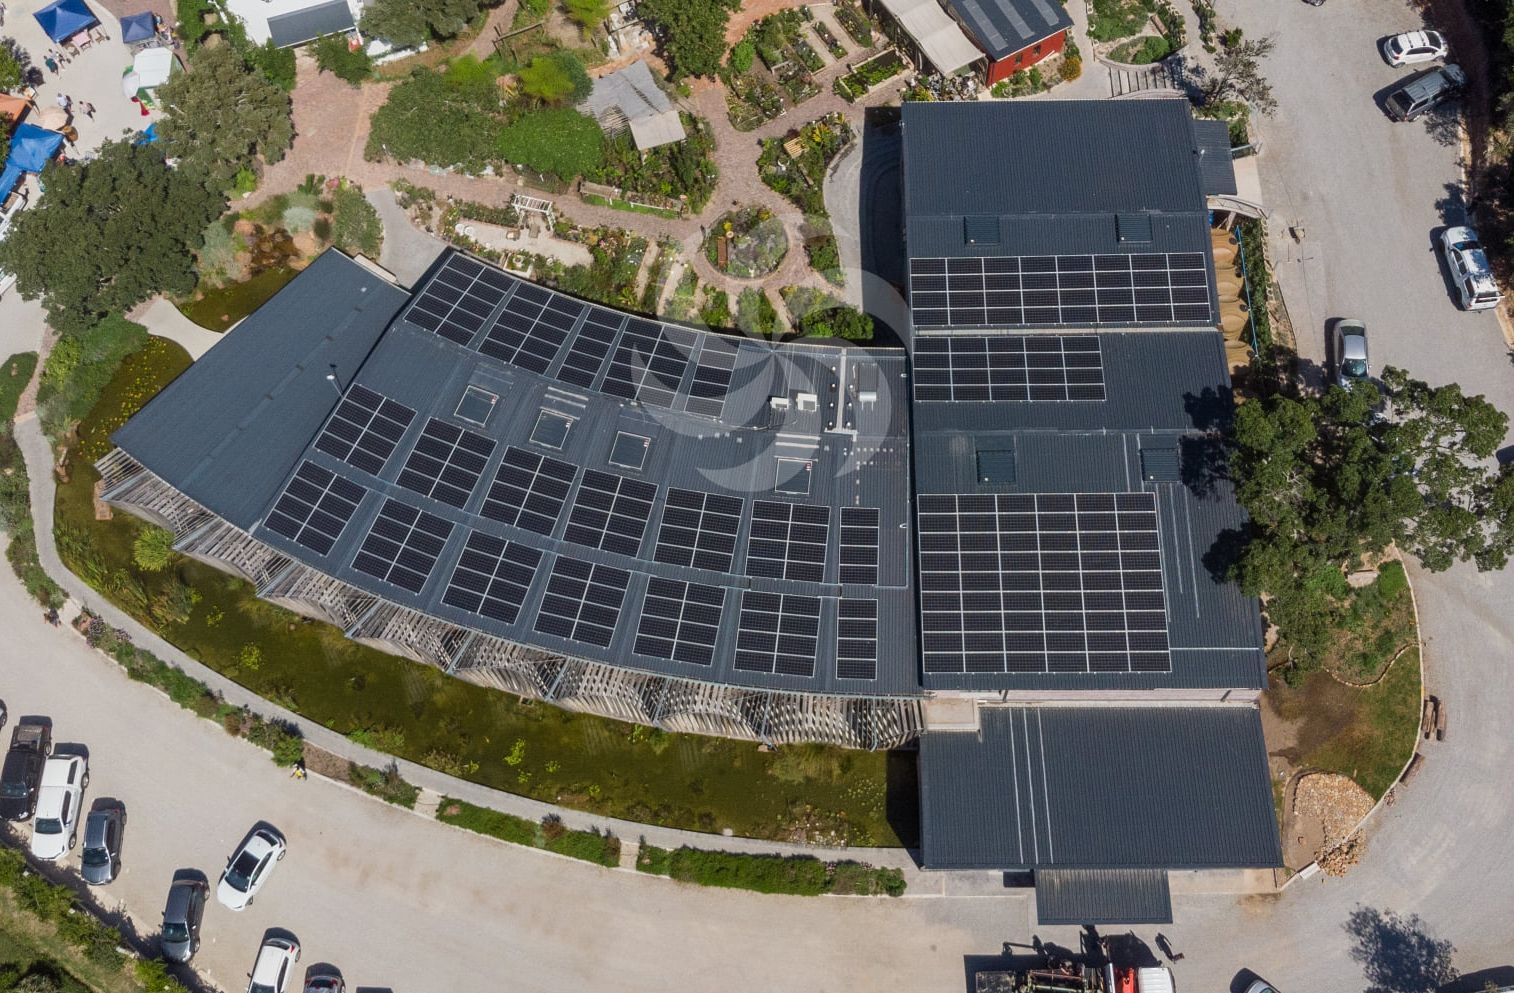 Image of 100 kWp Solar panels array of a grid-tied commercial installation completed for Mungo Mills in Plettenberg Bay, the Garden Route